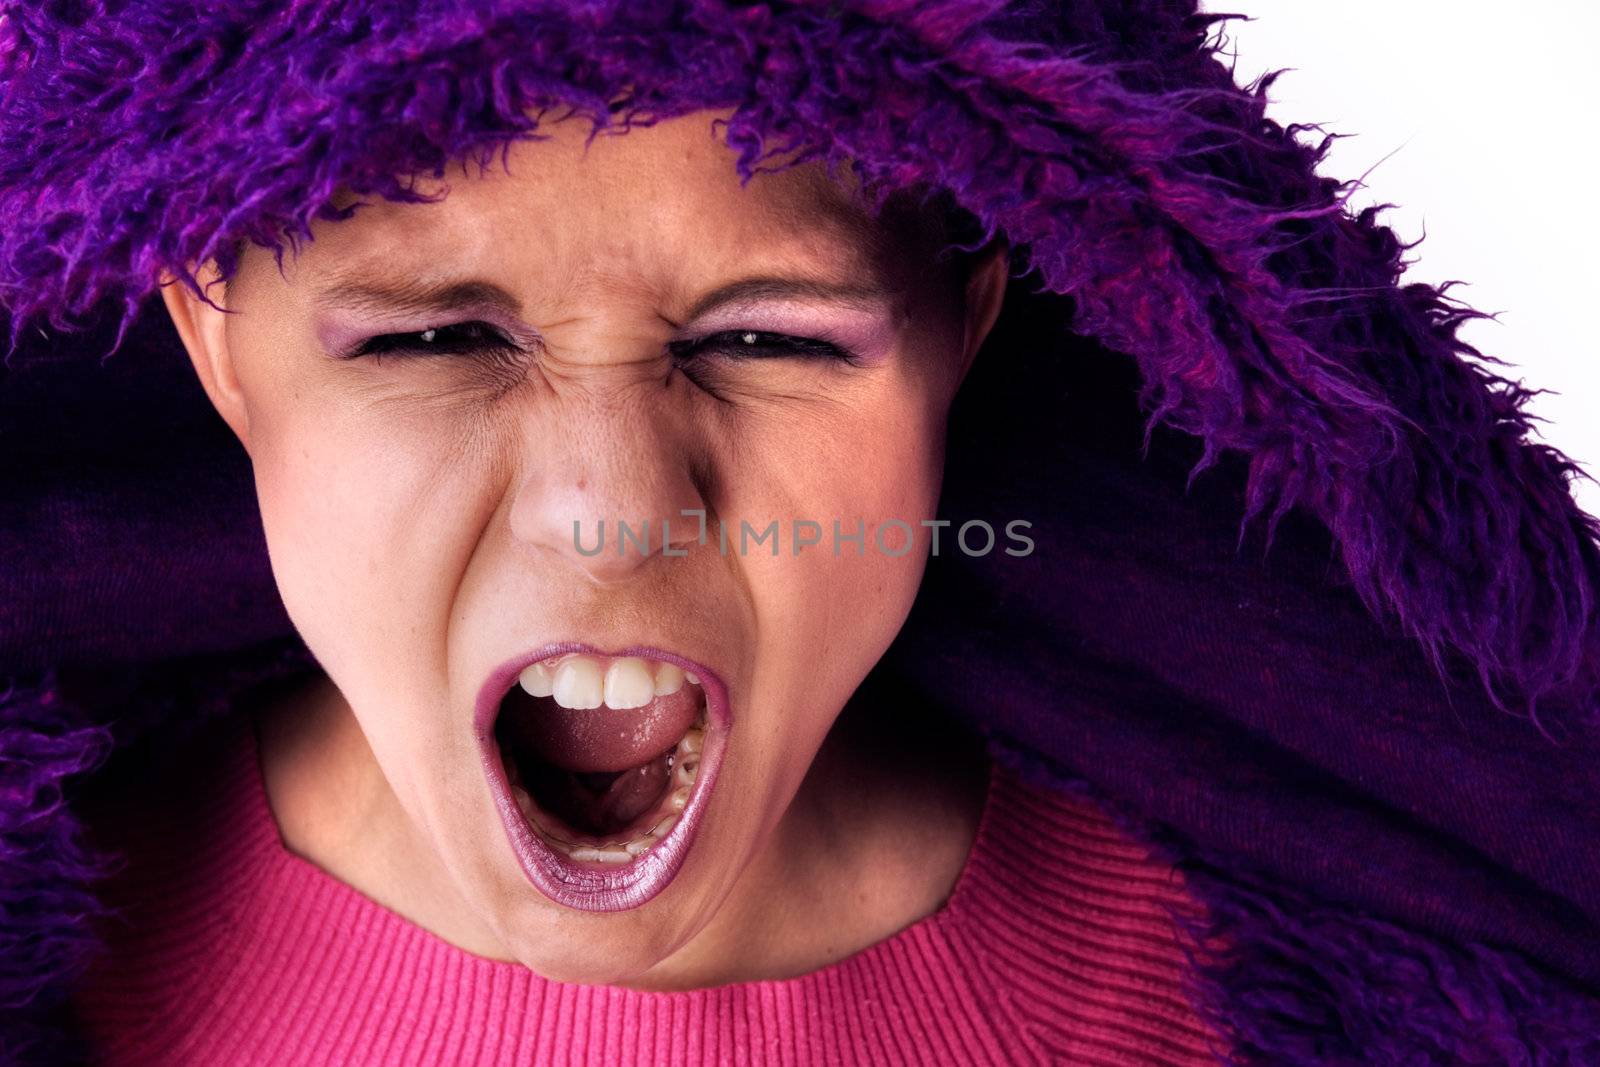 Agressive screaming woman by DNFStyle